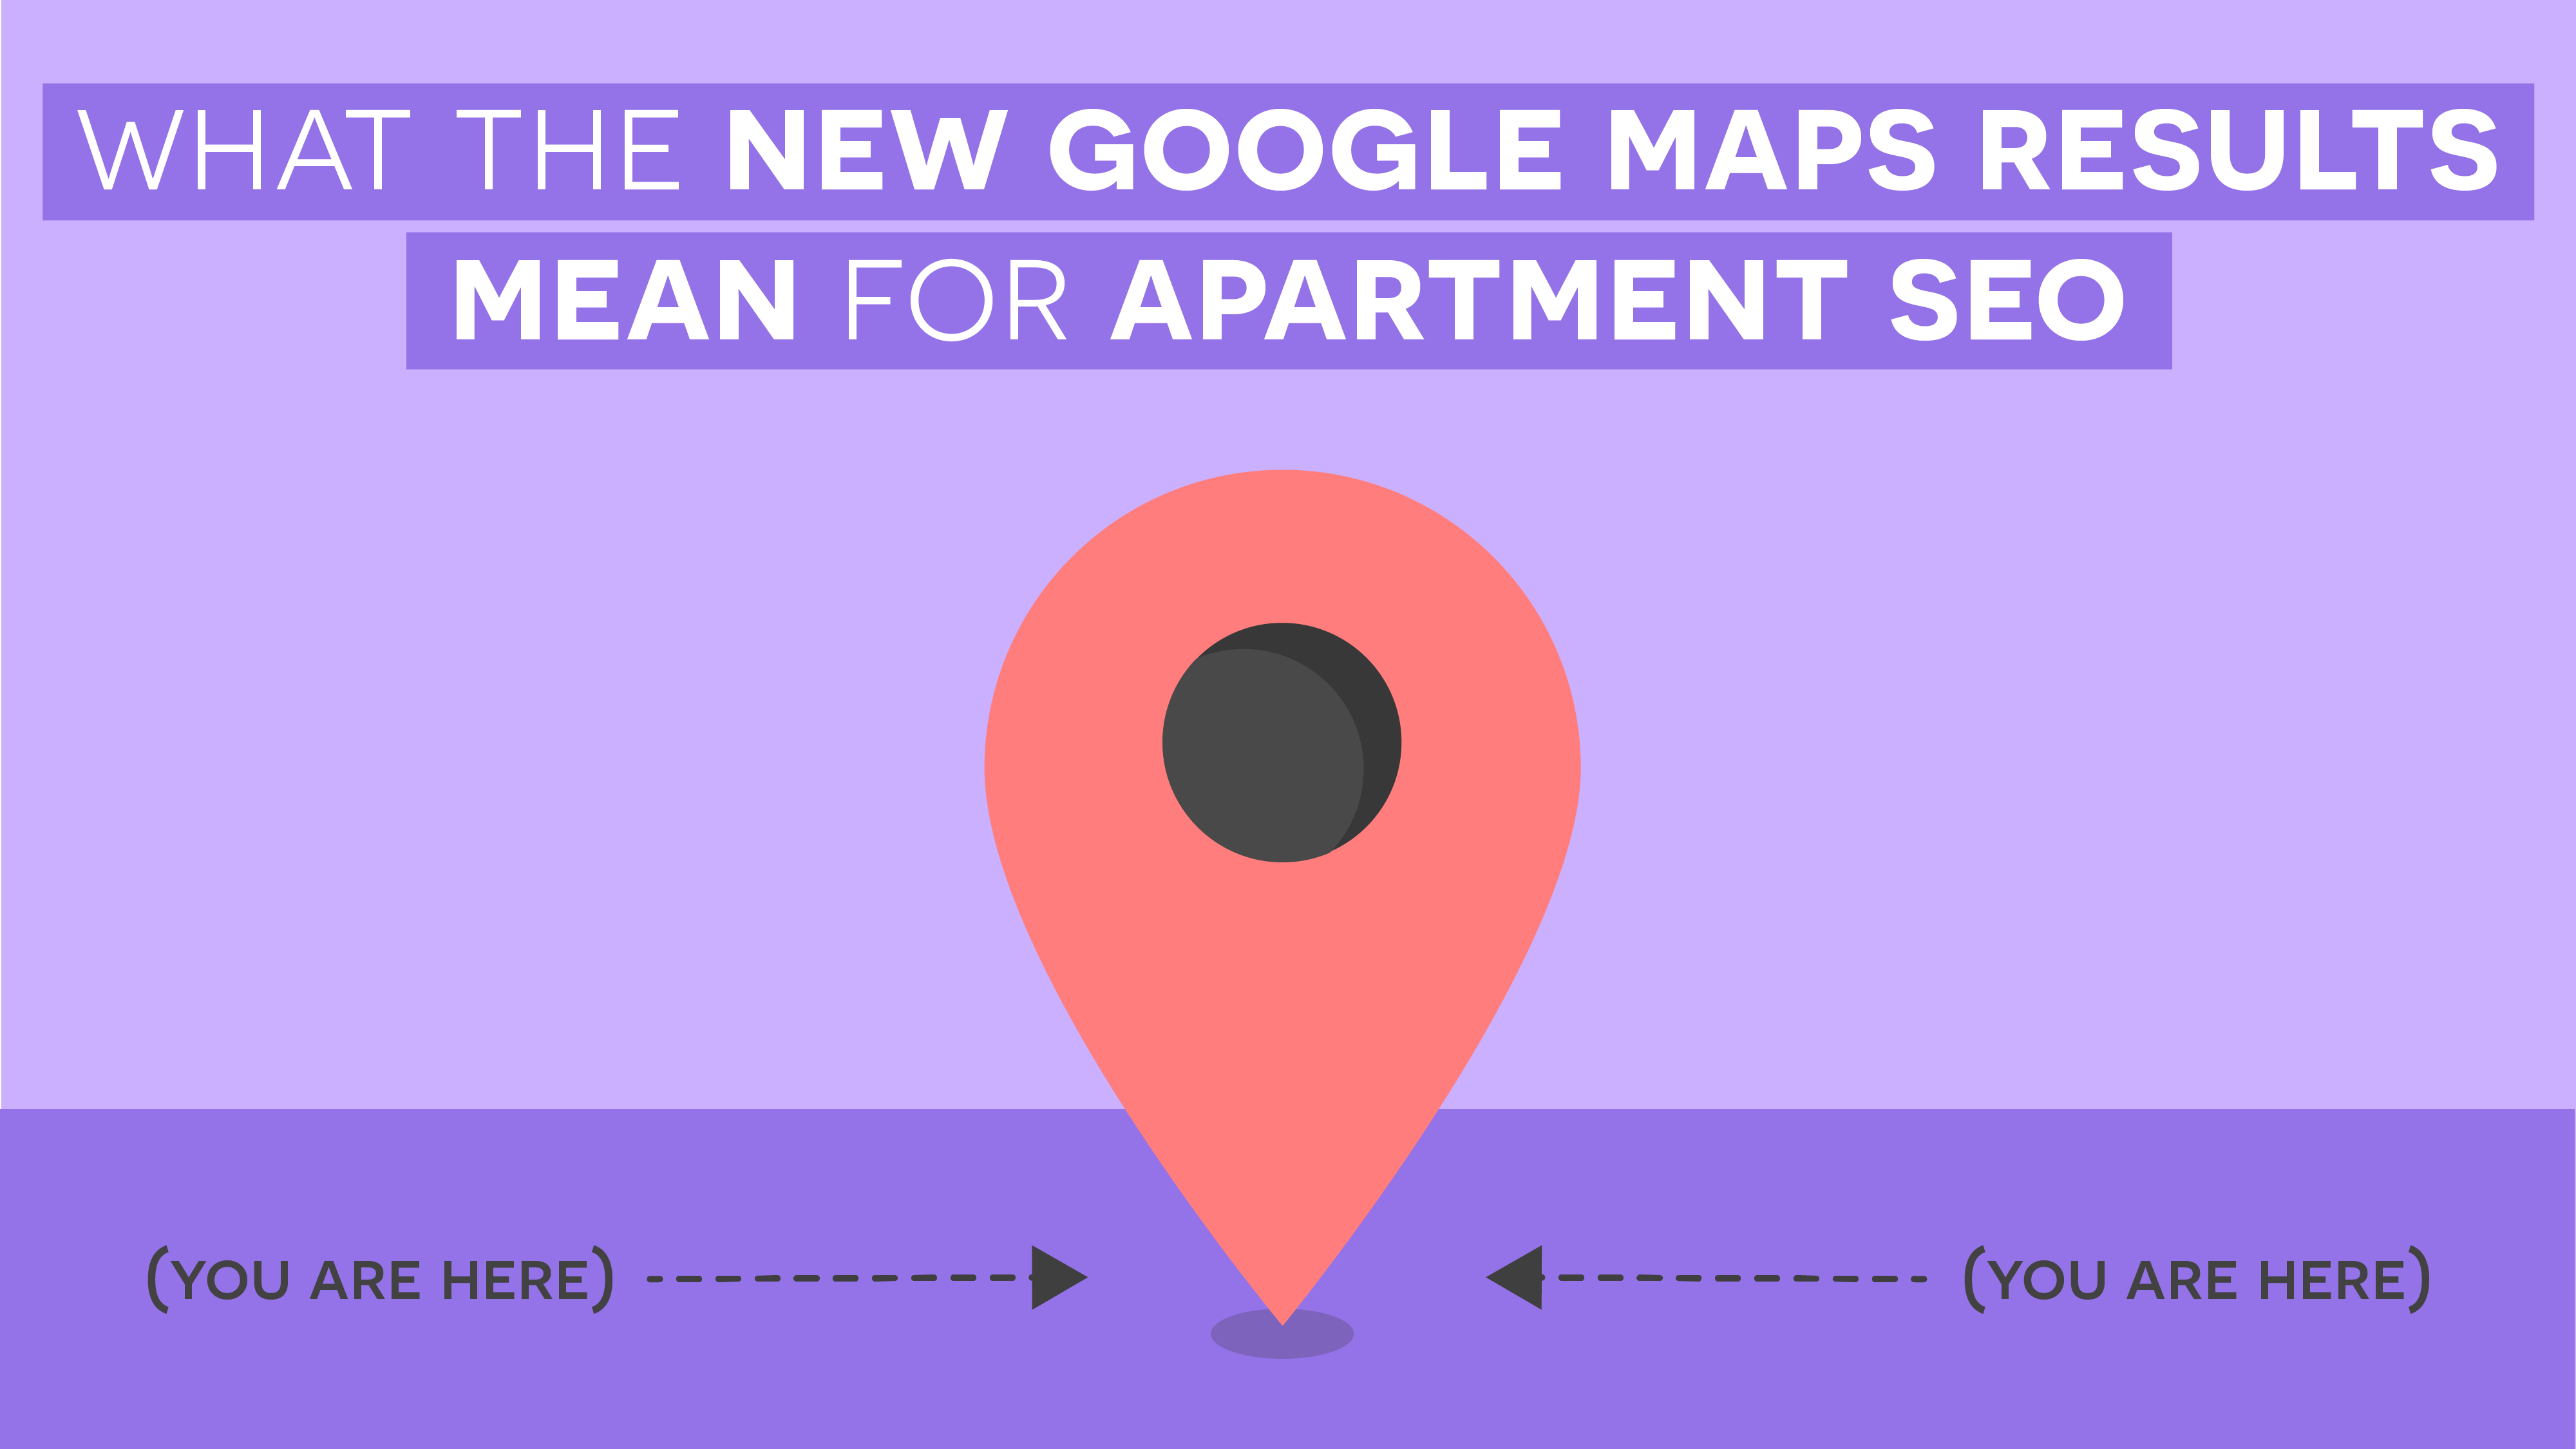 What the New Google Maps Results Mean for Apartment SEO